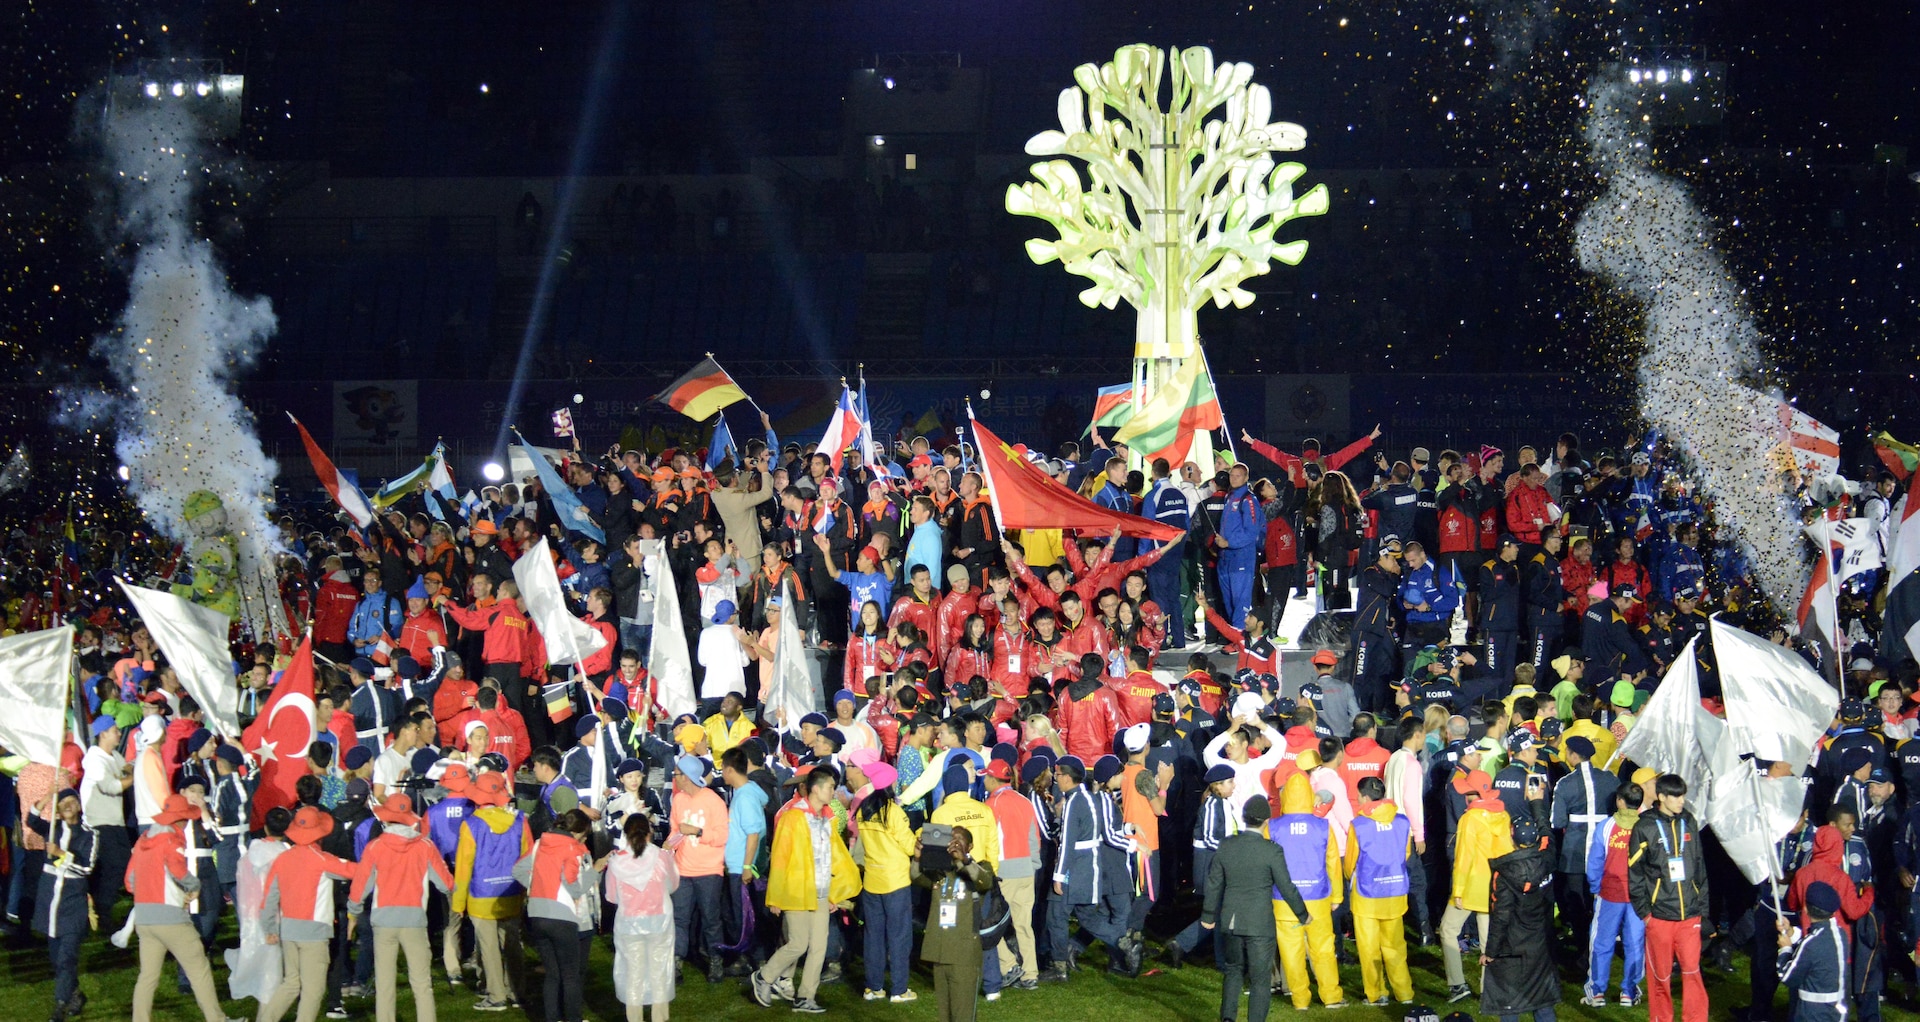 Military athletes from around the world celebrate the closing of the 6th CISM World Games in the center of the main stadium of the Korean Armed Forces Athletic Corps in MunGyeong, South Korea, Oct. 11, 2015.